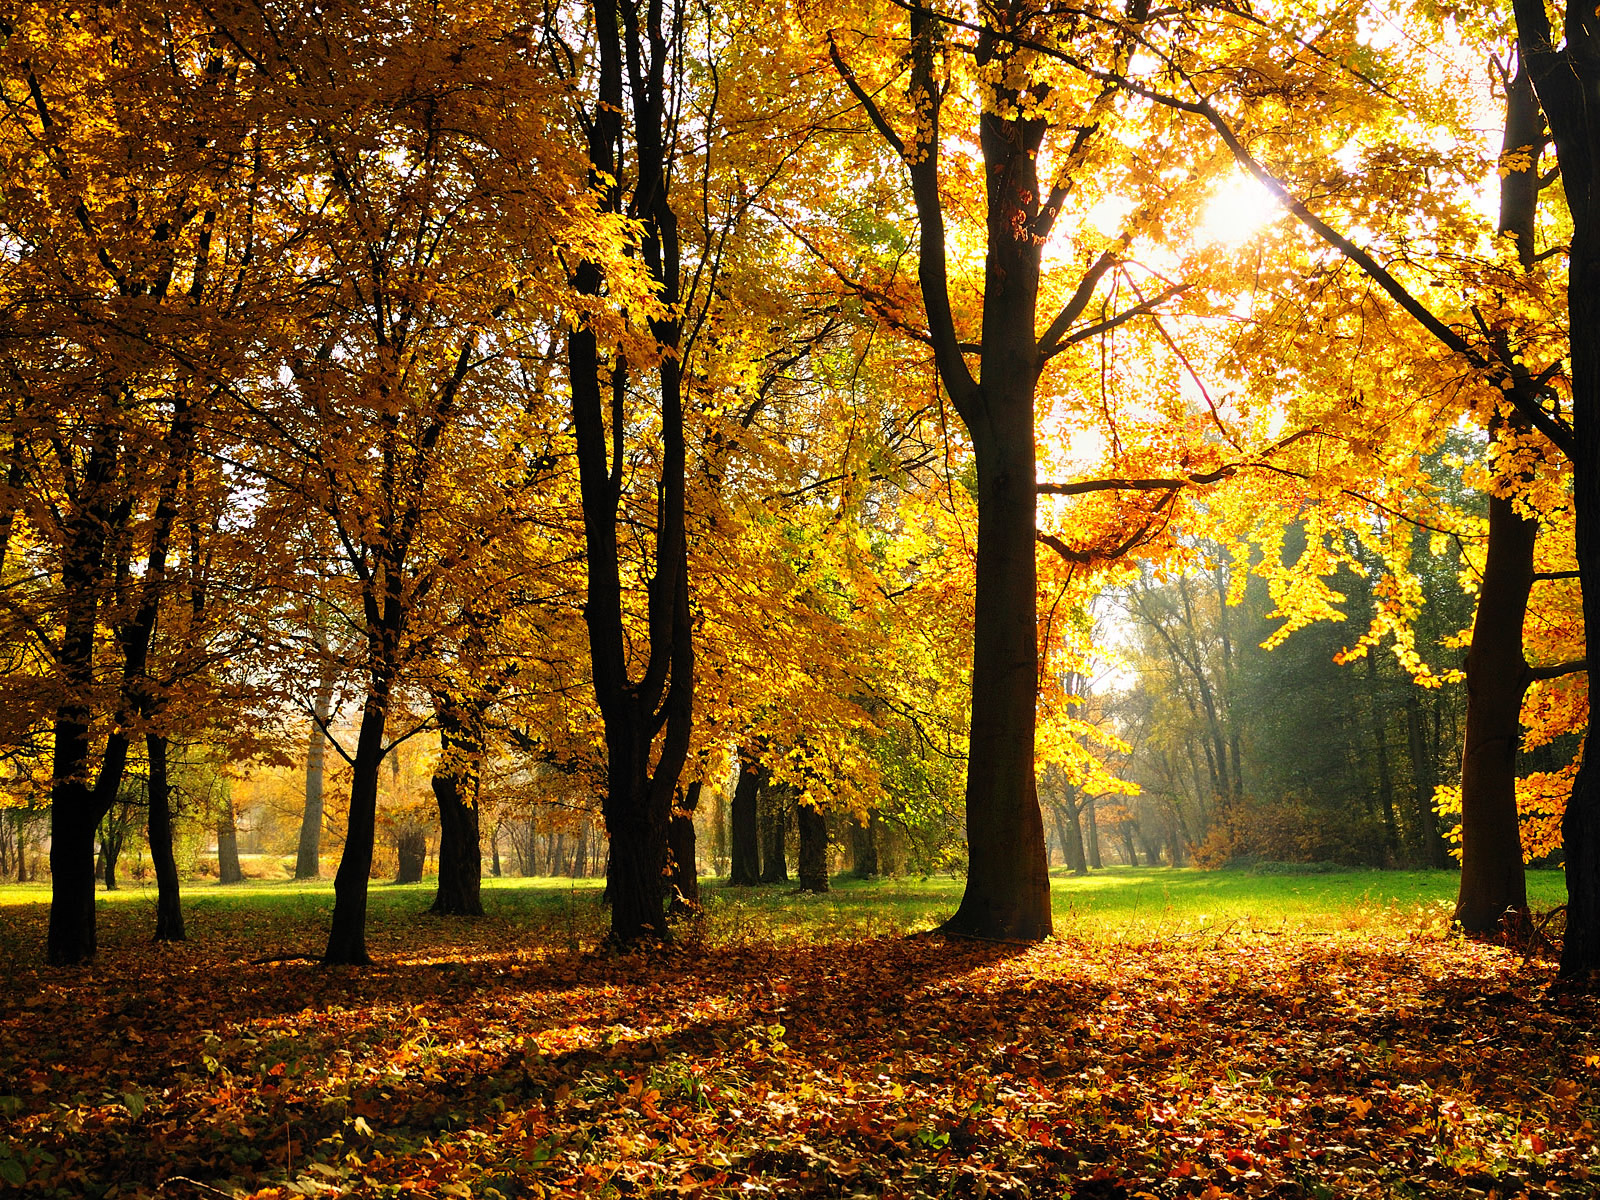 Autumn background pictures